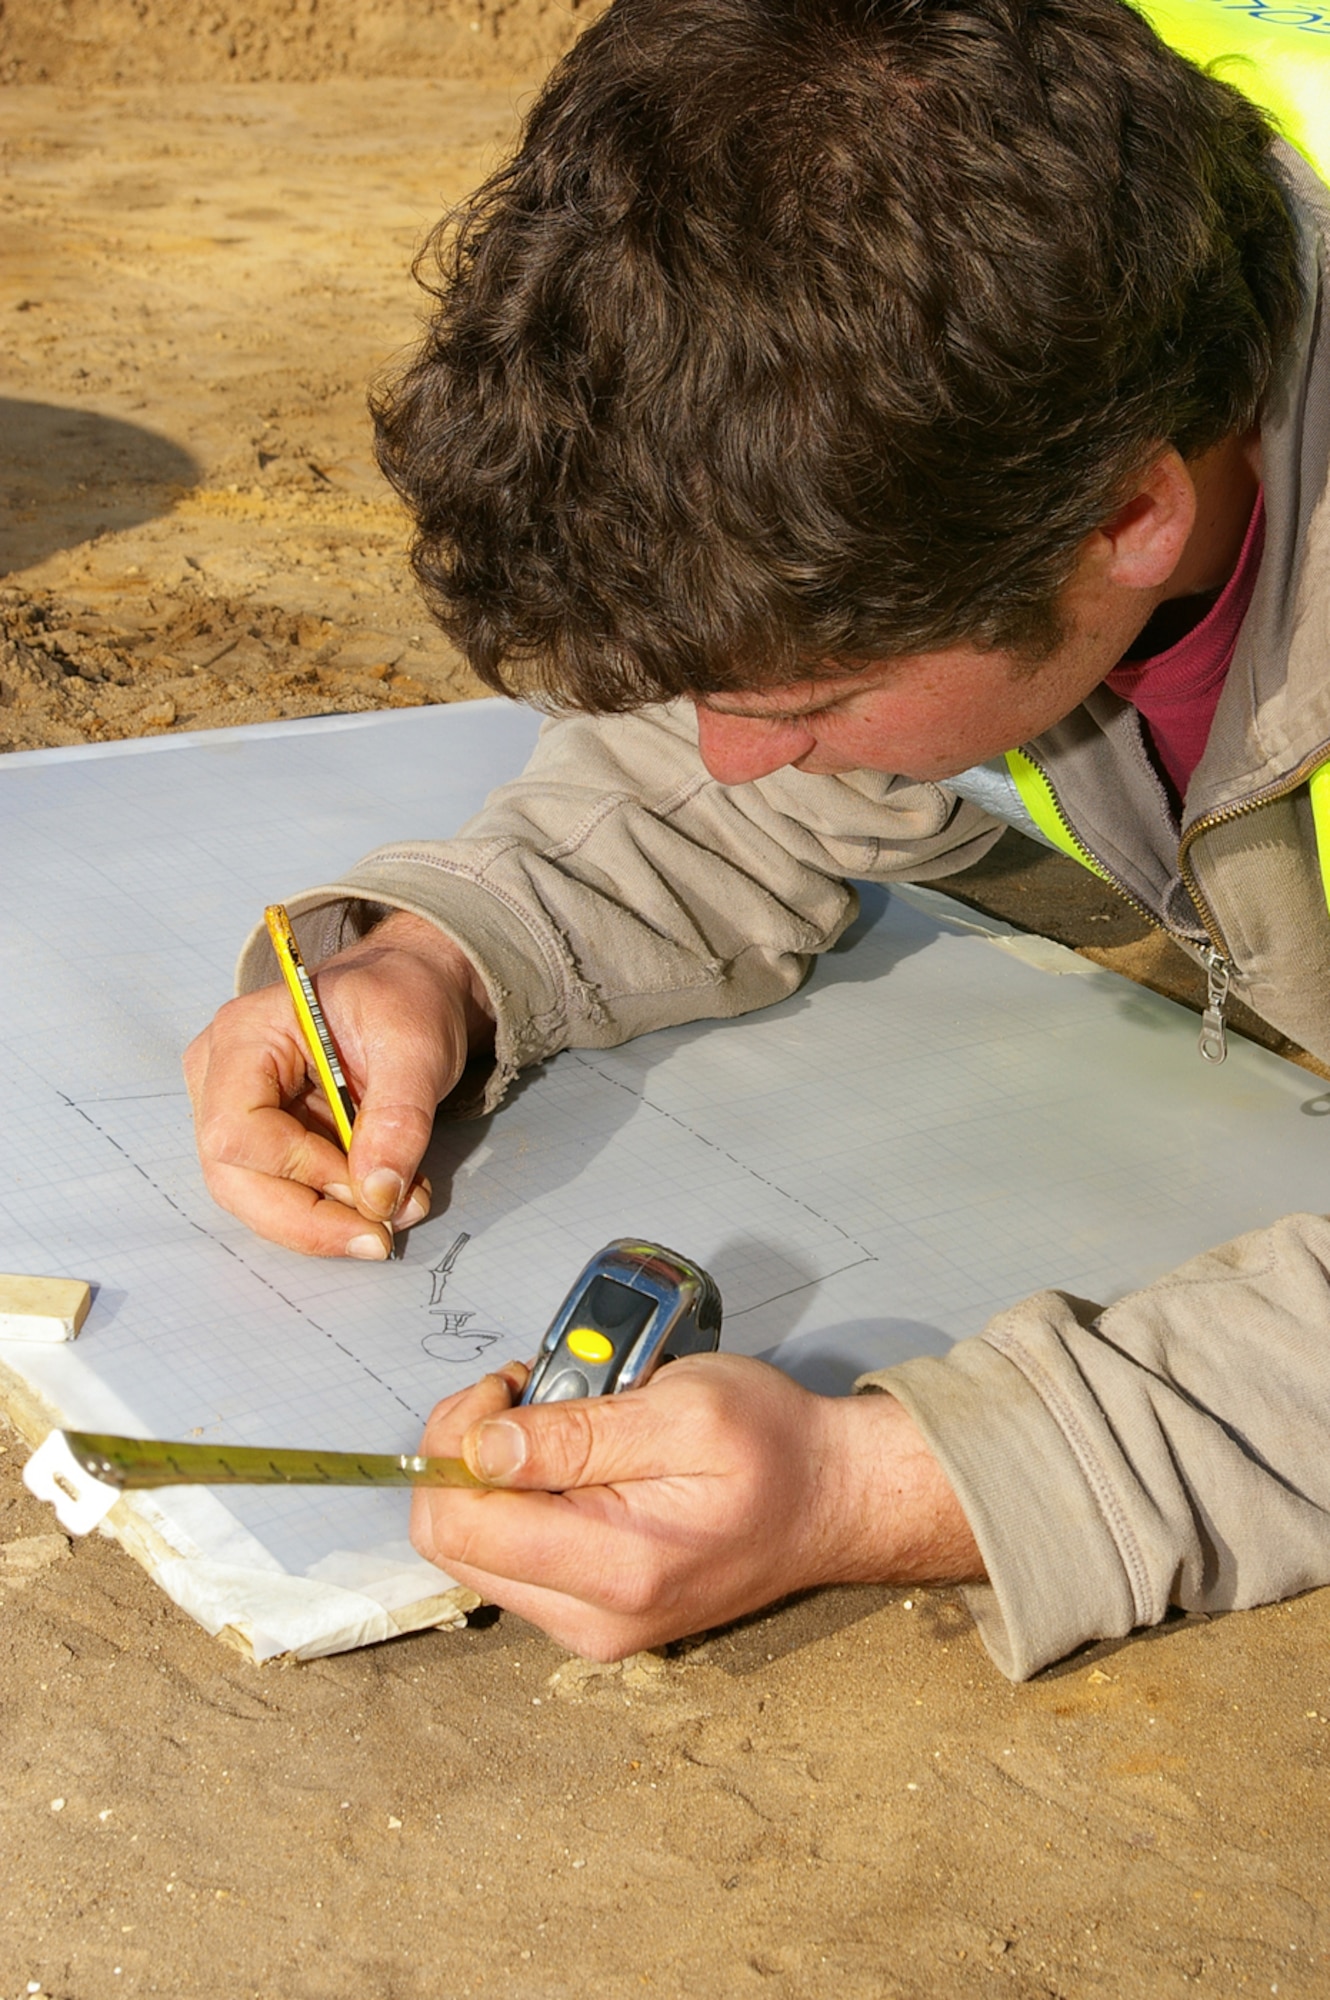 John Sims, Suffolk County Council archeological service, draws a sketch of the human skeleton he discovered March 12 during an archeological dig at the RAF Mildenhall officers' housing area in Beck Row. The skeleton was completely uncovered March 14. It is thought to be up to 2,000 years old. The skeleton has now been removed from the area and will be studied by archeology specialists to uncover further details about it. (U.S. Air Force photo by Karen Abeyasekere)